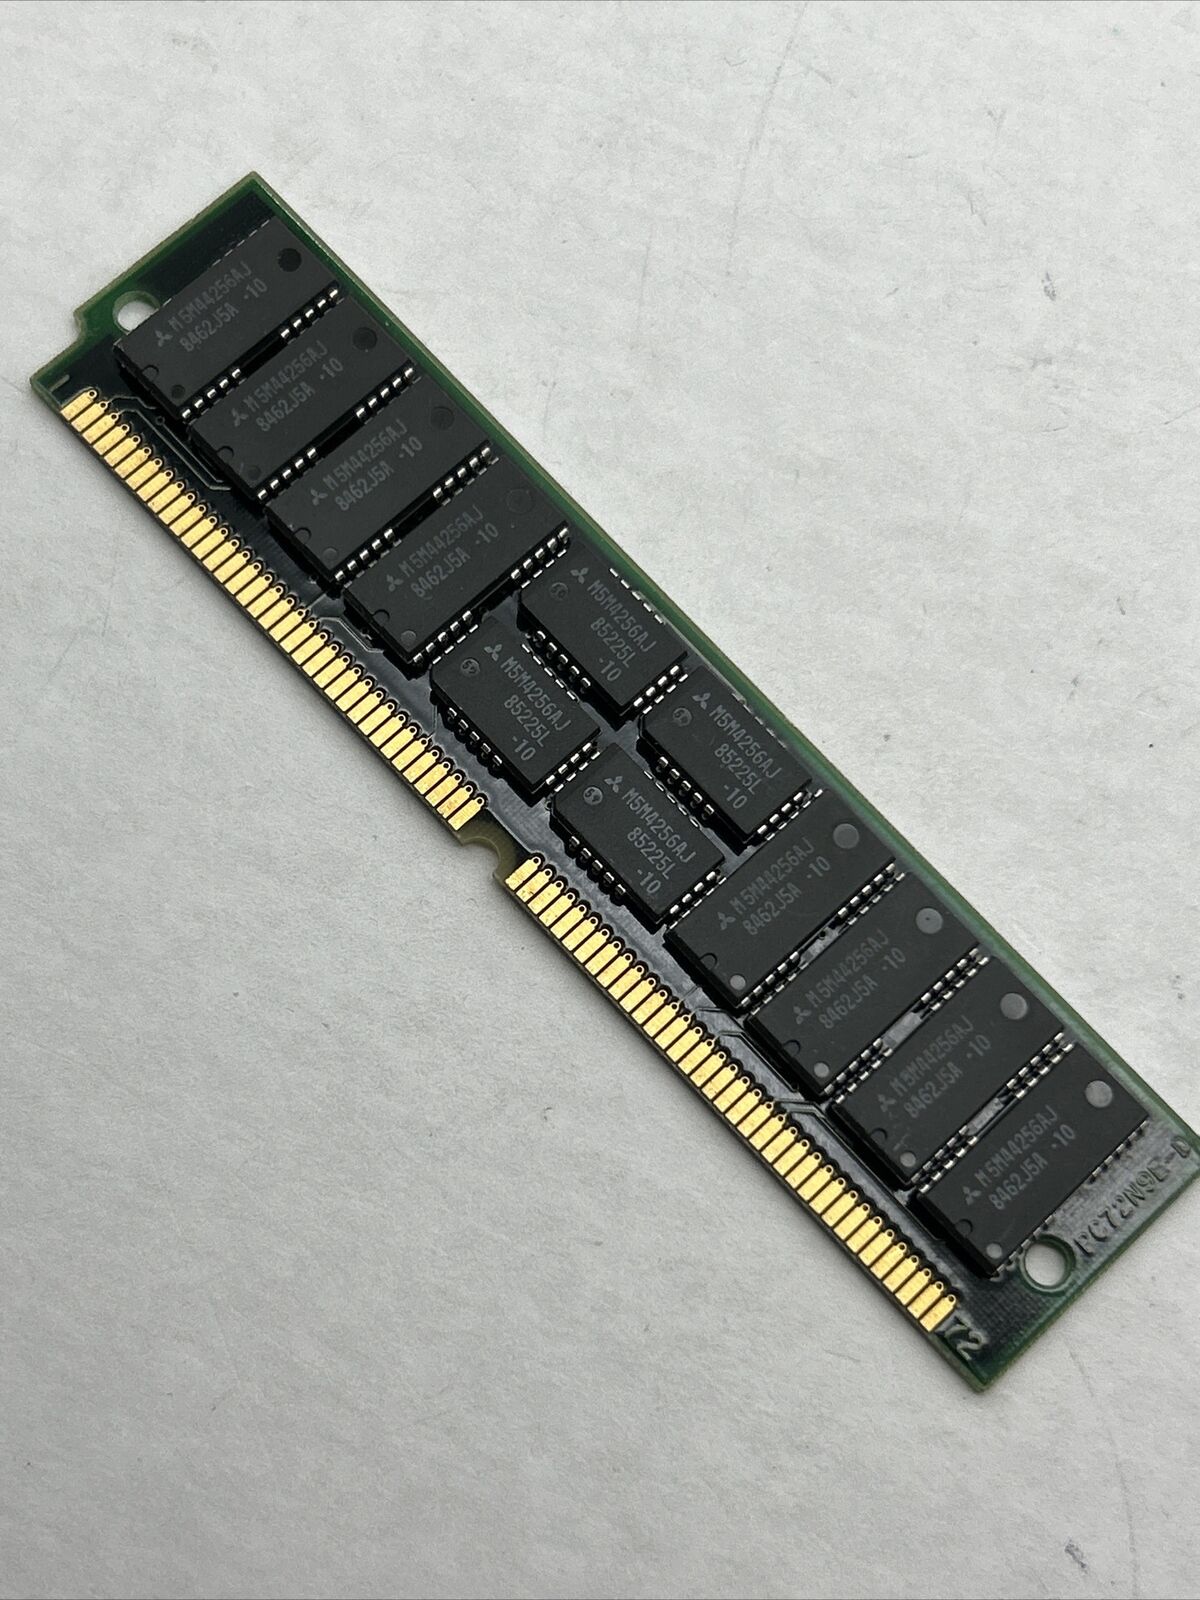 1MB Fast Page SIMM 72-PIN FPM Parity 100ns Memory 256x36 Rare Collectible